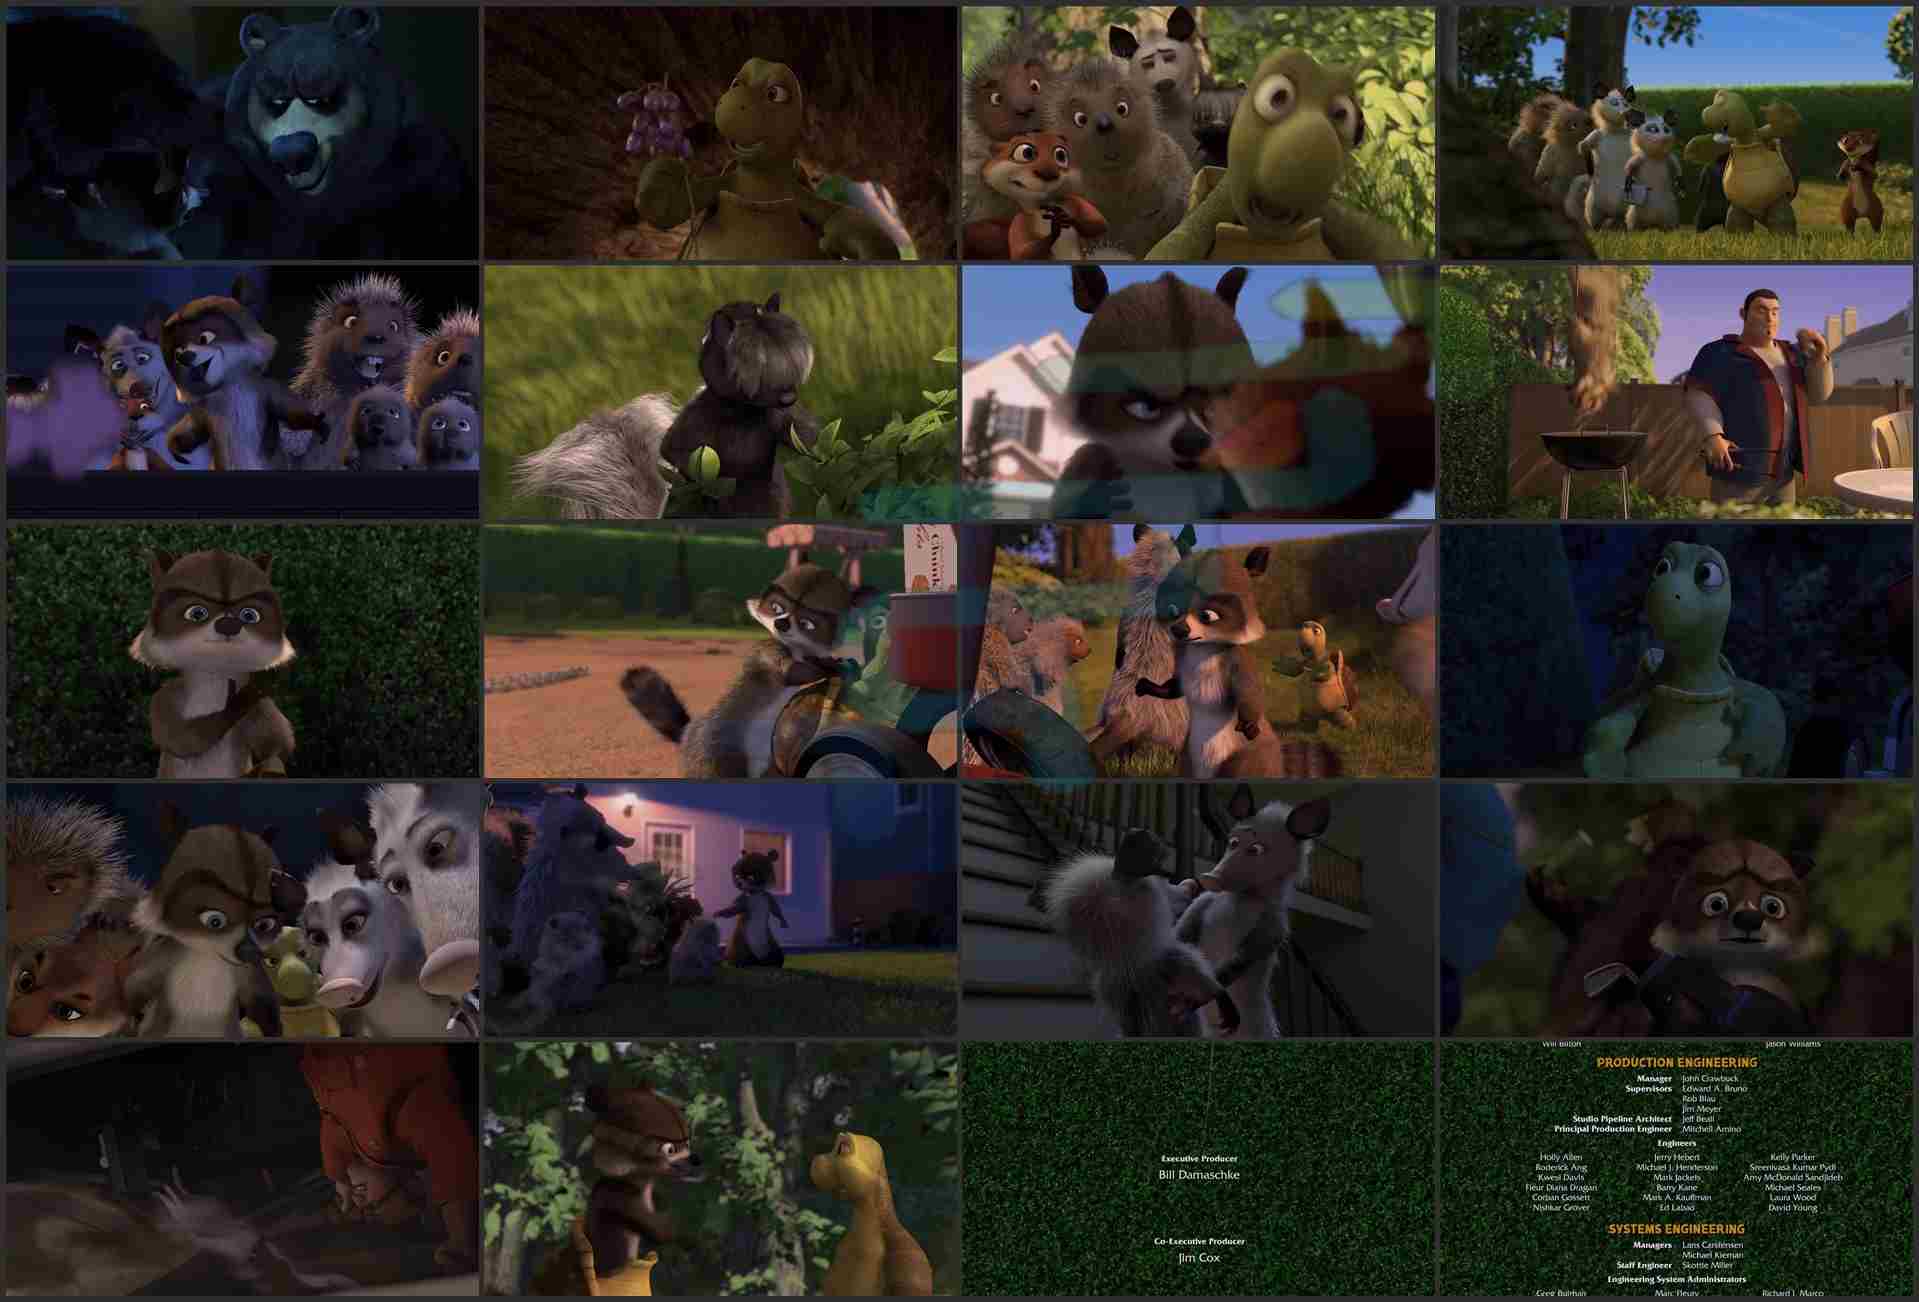 Over_the_Hedge_2006_BluRay_720p_Download.ir.mkv (Copy)